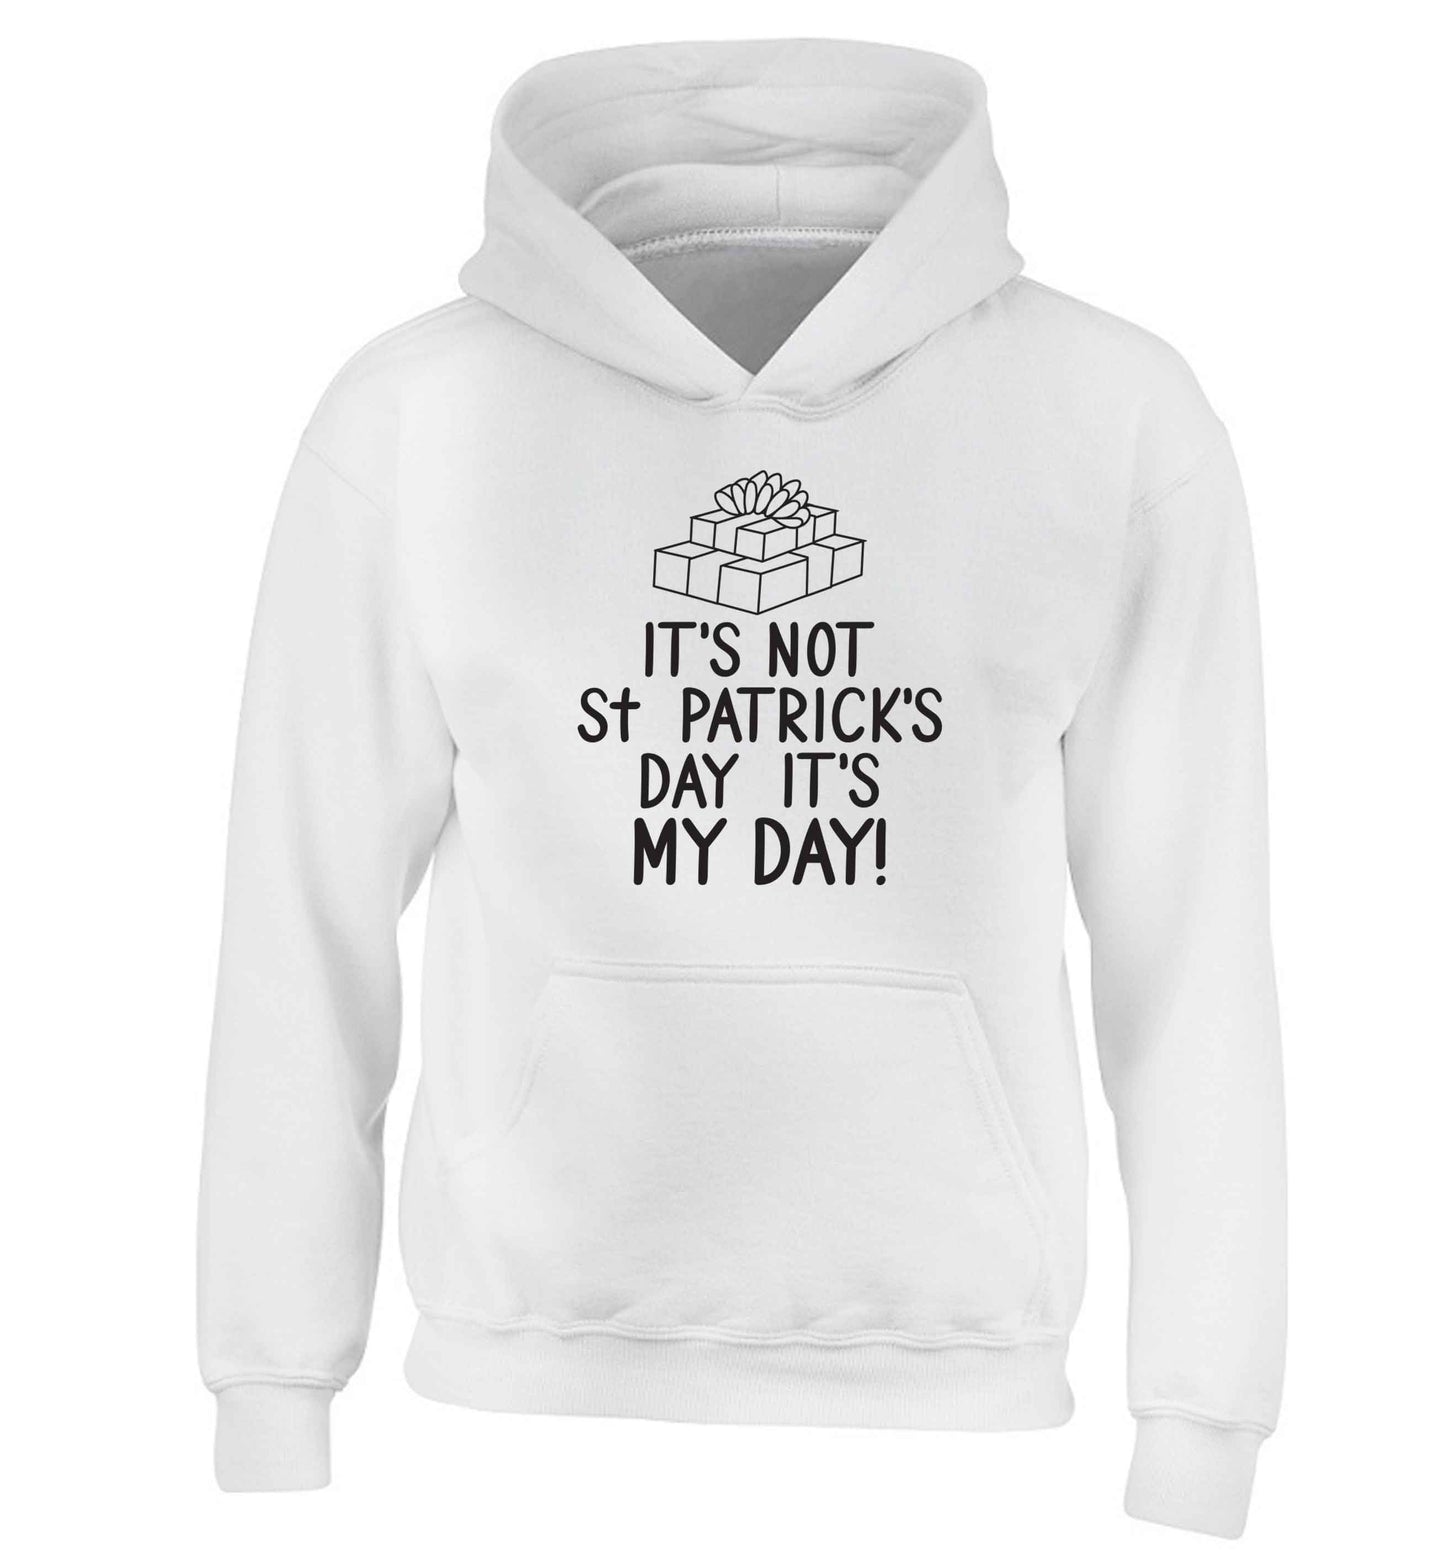 Funny gifts for your mum on mother's dayor her birthday! It's not St Patricks day it's my day children's white hoodie 12-13 Years